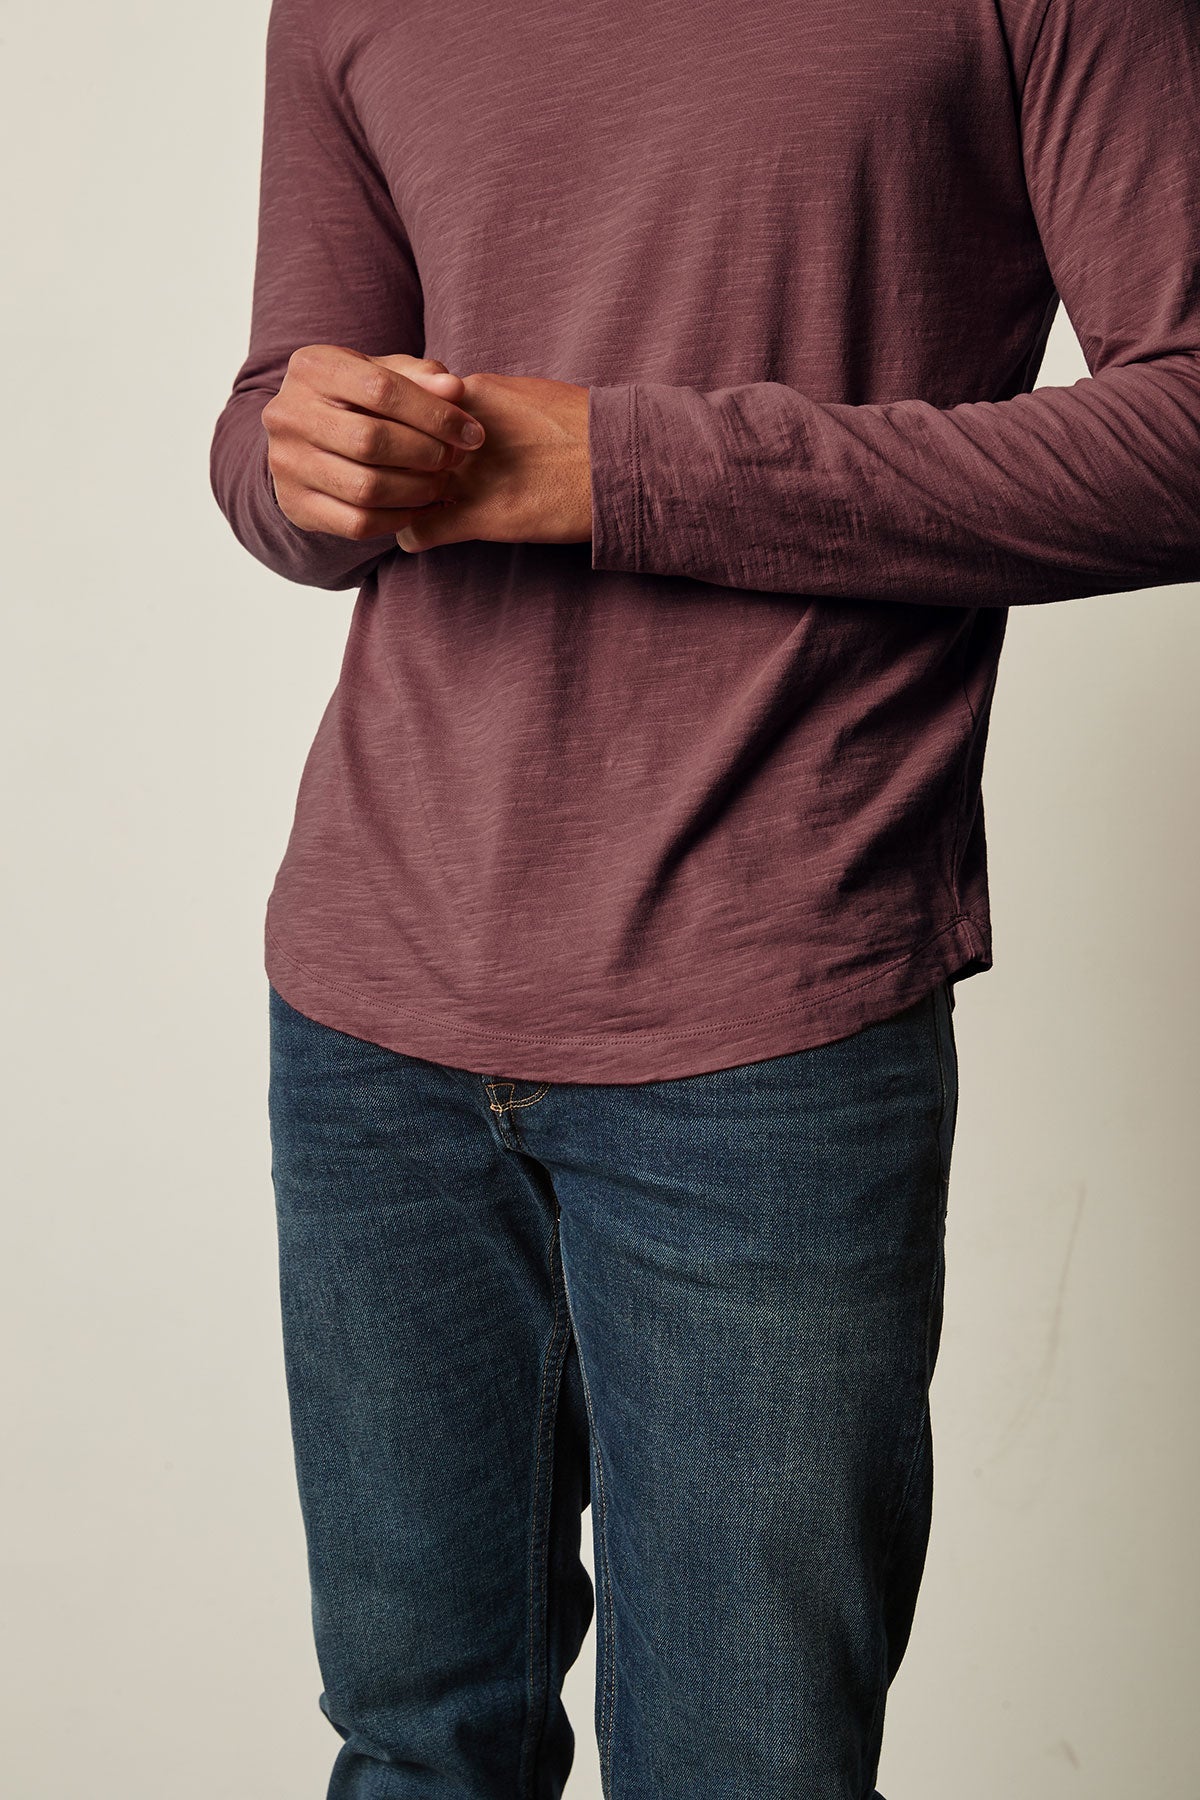 A man wearing jeans and a KAI CREW NECK TEE by Velvet by Graham & Spencer, creating a vintage-feel with the perfect layering piece.-25793842512065